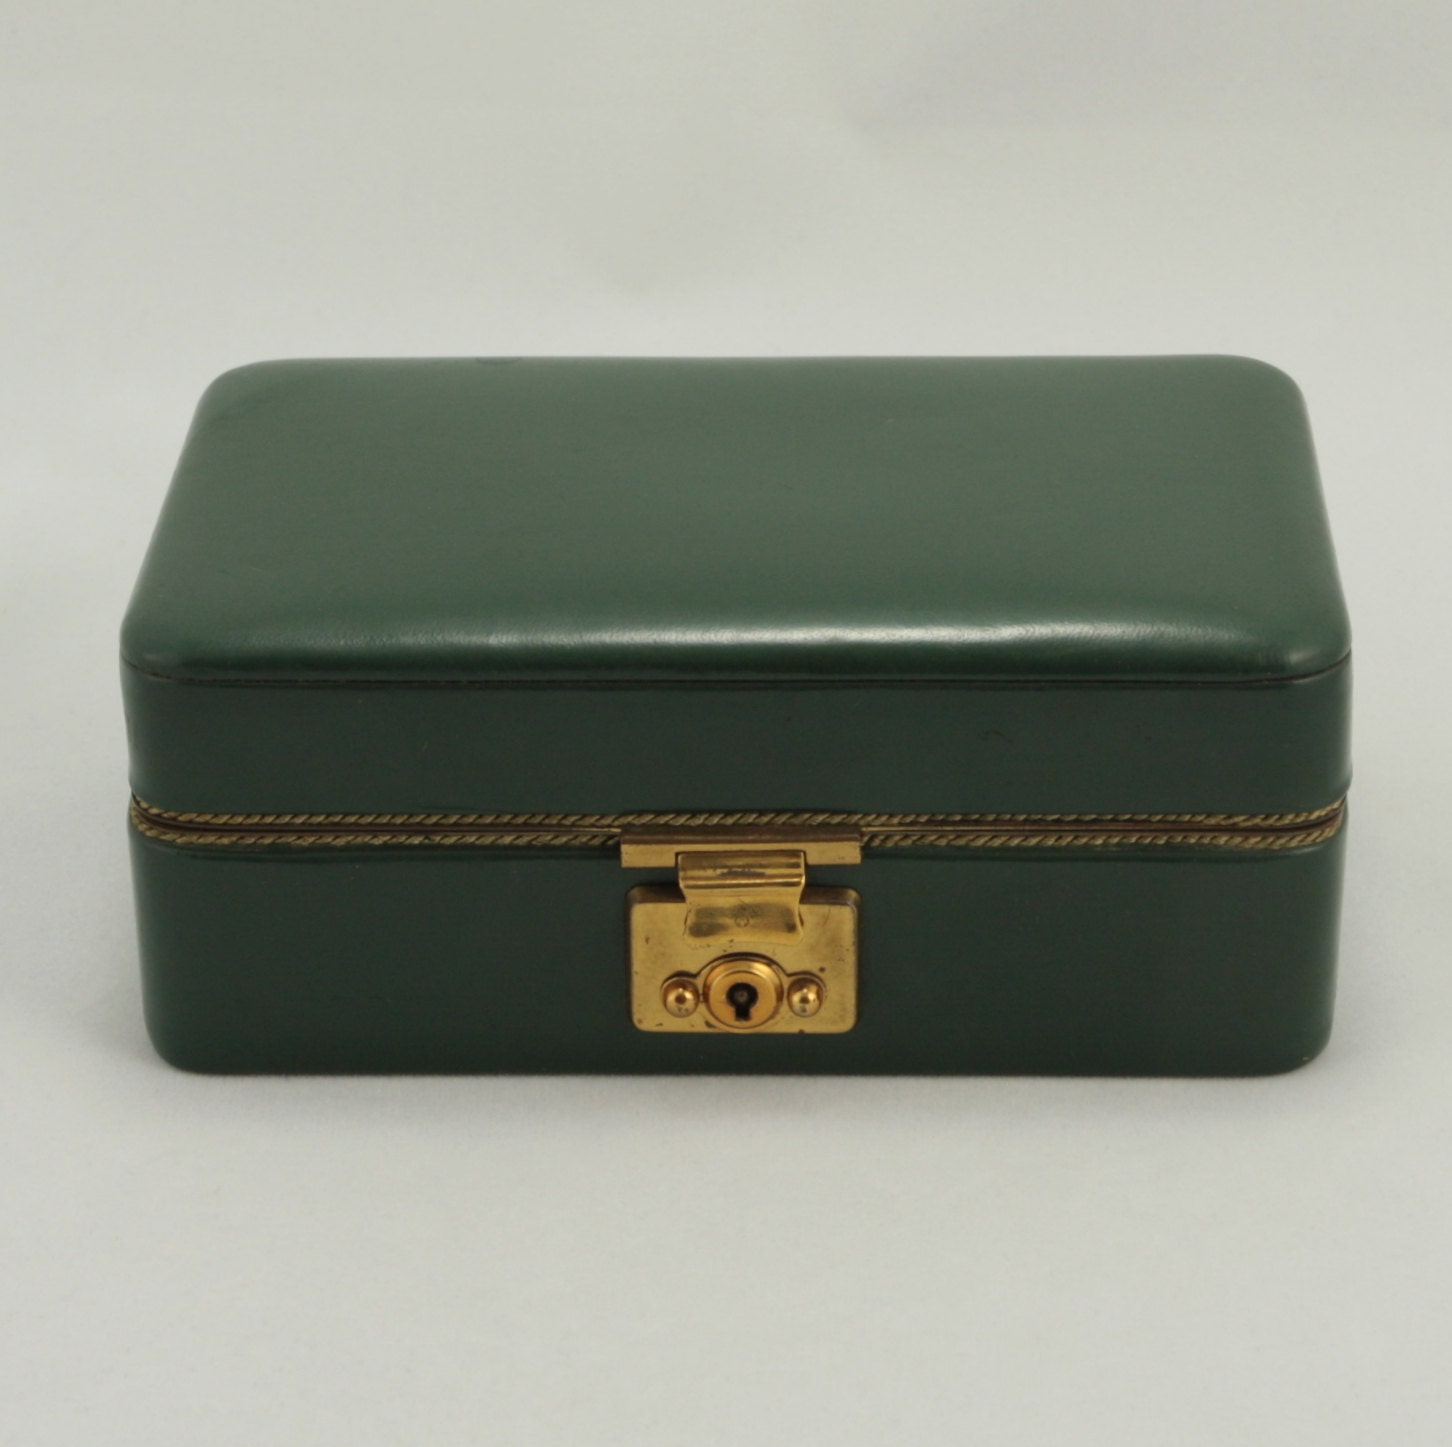 Travel Jewelry Box Green Leather 50's Vtg by charmings on Etsy